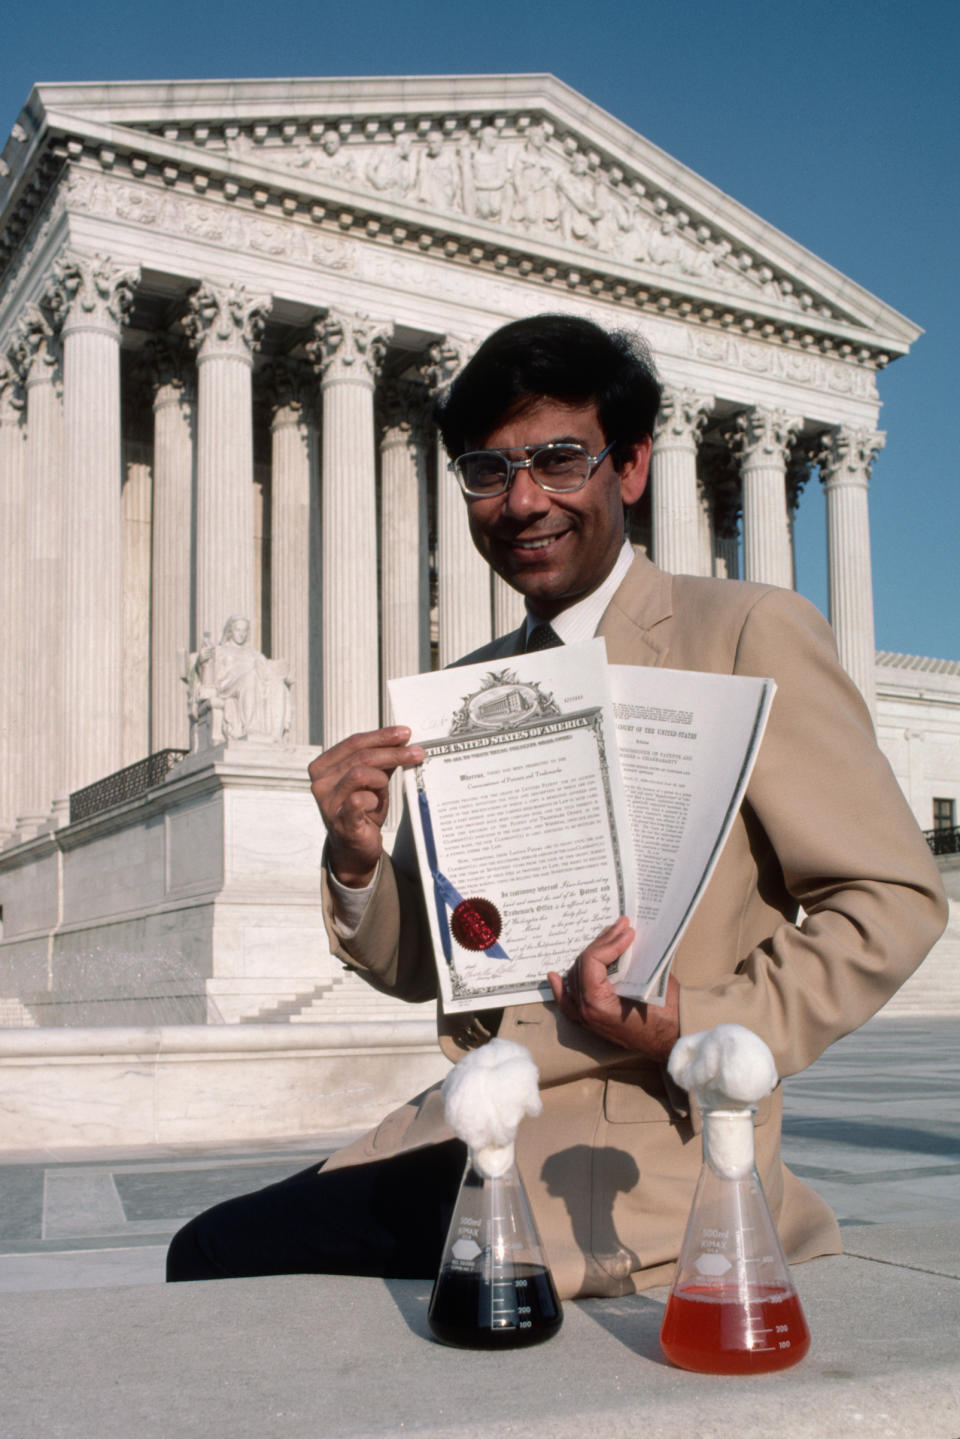 In front of the Supreme Court of the United States, Dr. Ananda Chakrabarty displays a trio of souvenirs of his pioneering experiments with a recombinant DNA created oil spill-eating bacteria.